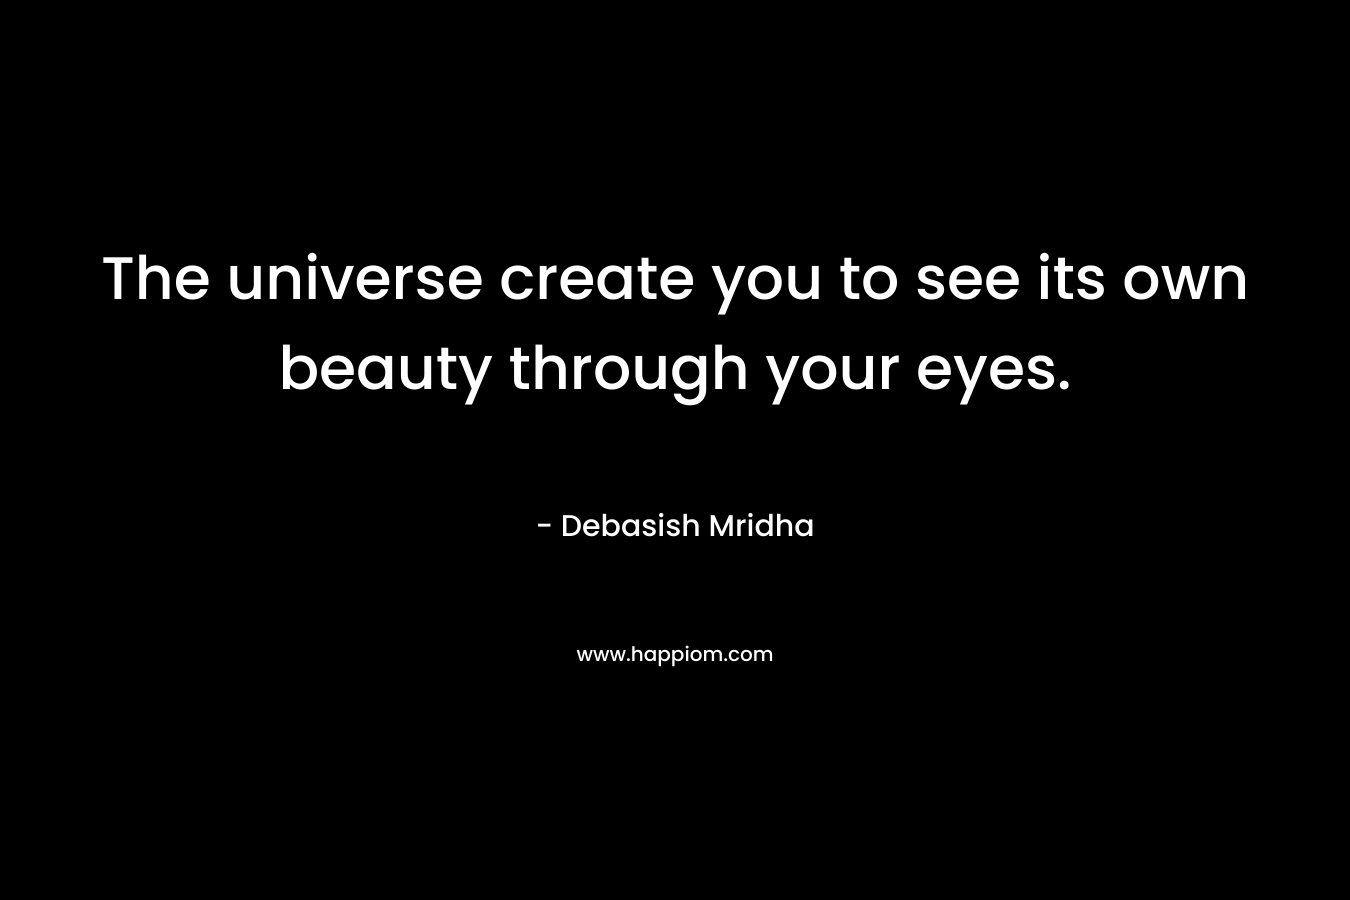 The universe create you to see its own beauty through your eyes.